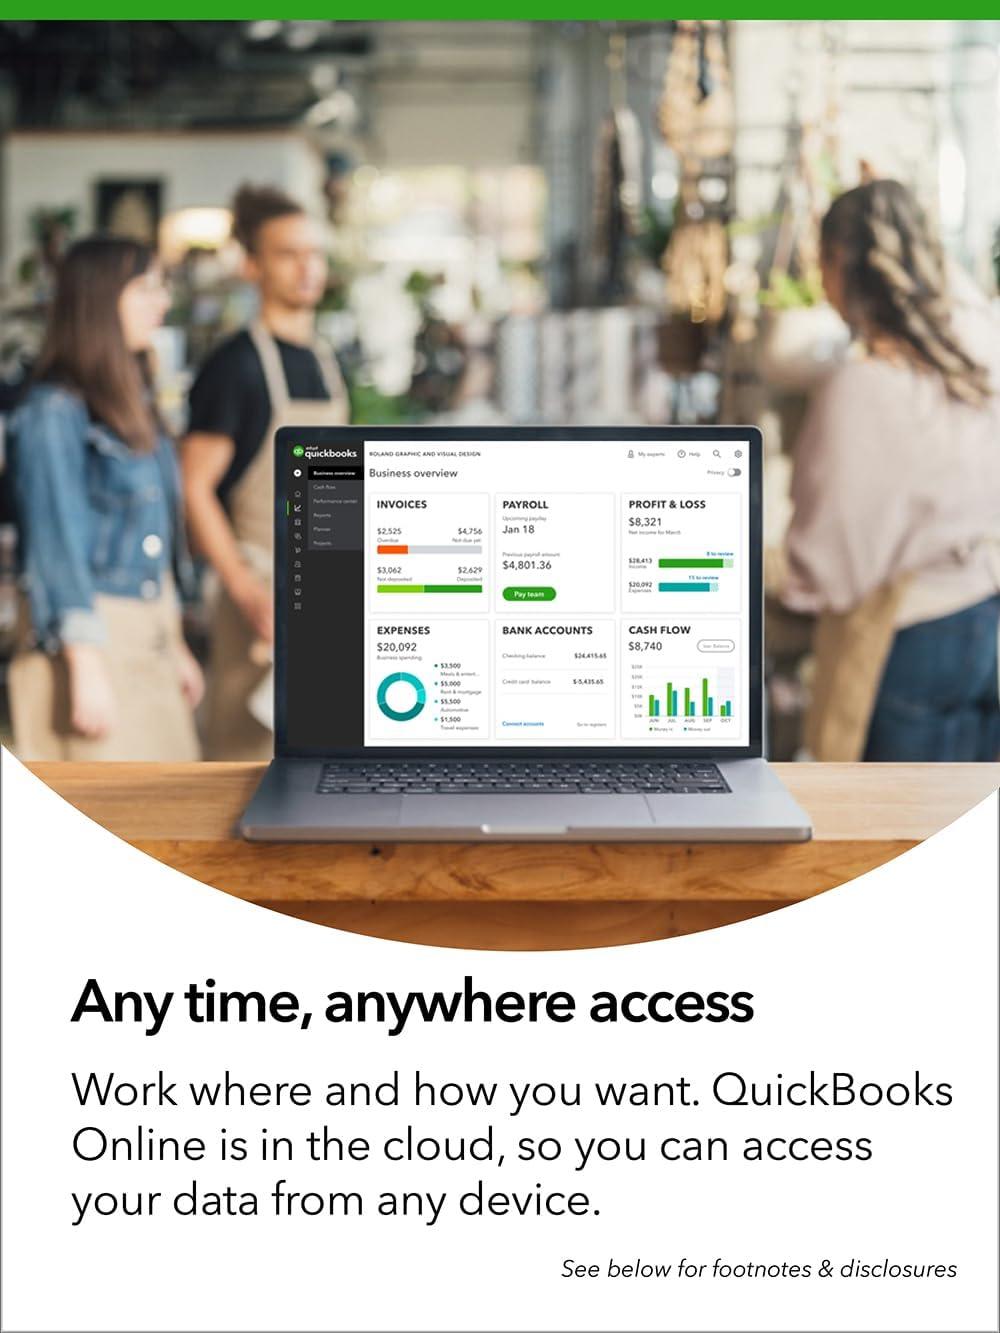 Quickbooks Online Plus - Instant Download for Windows and Mac (5 Users)